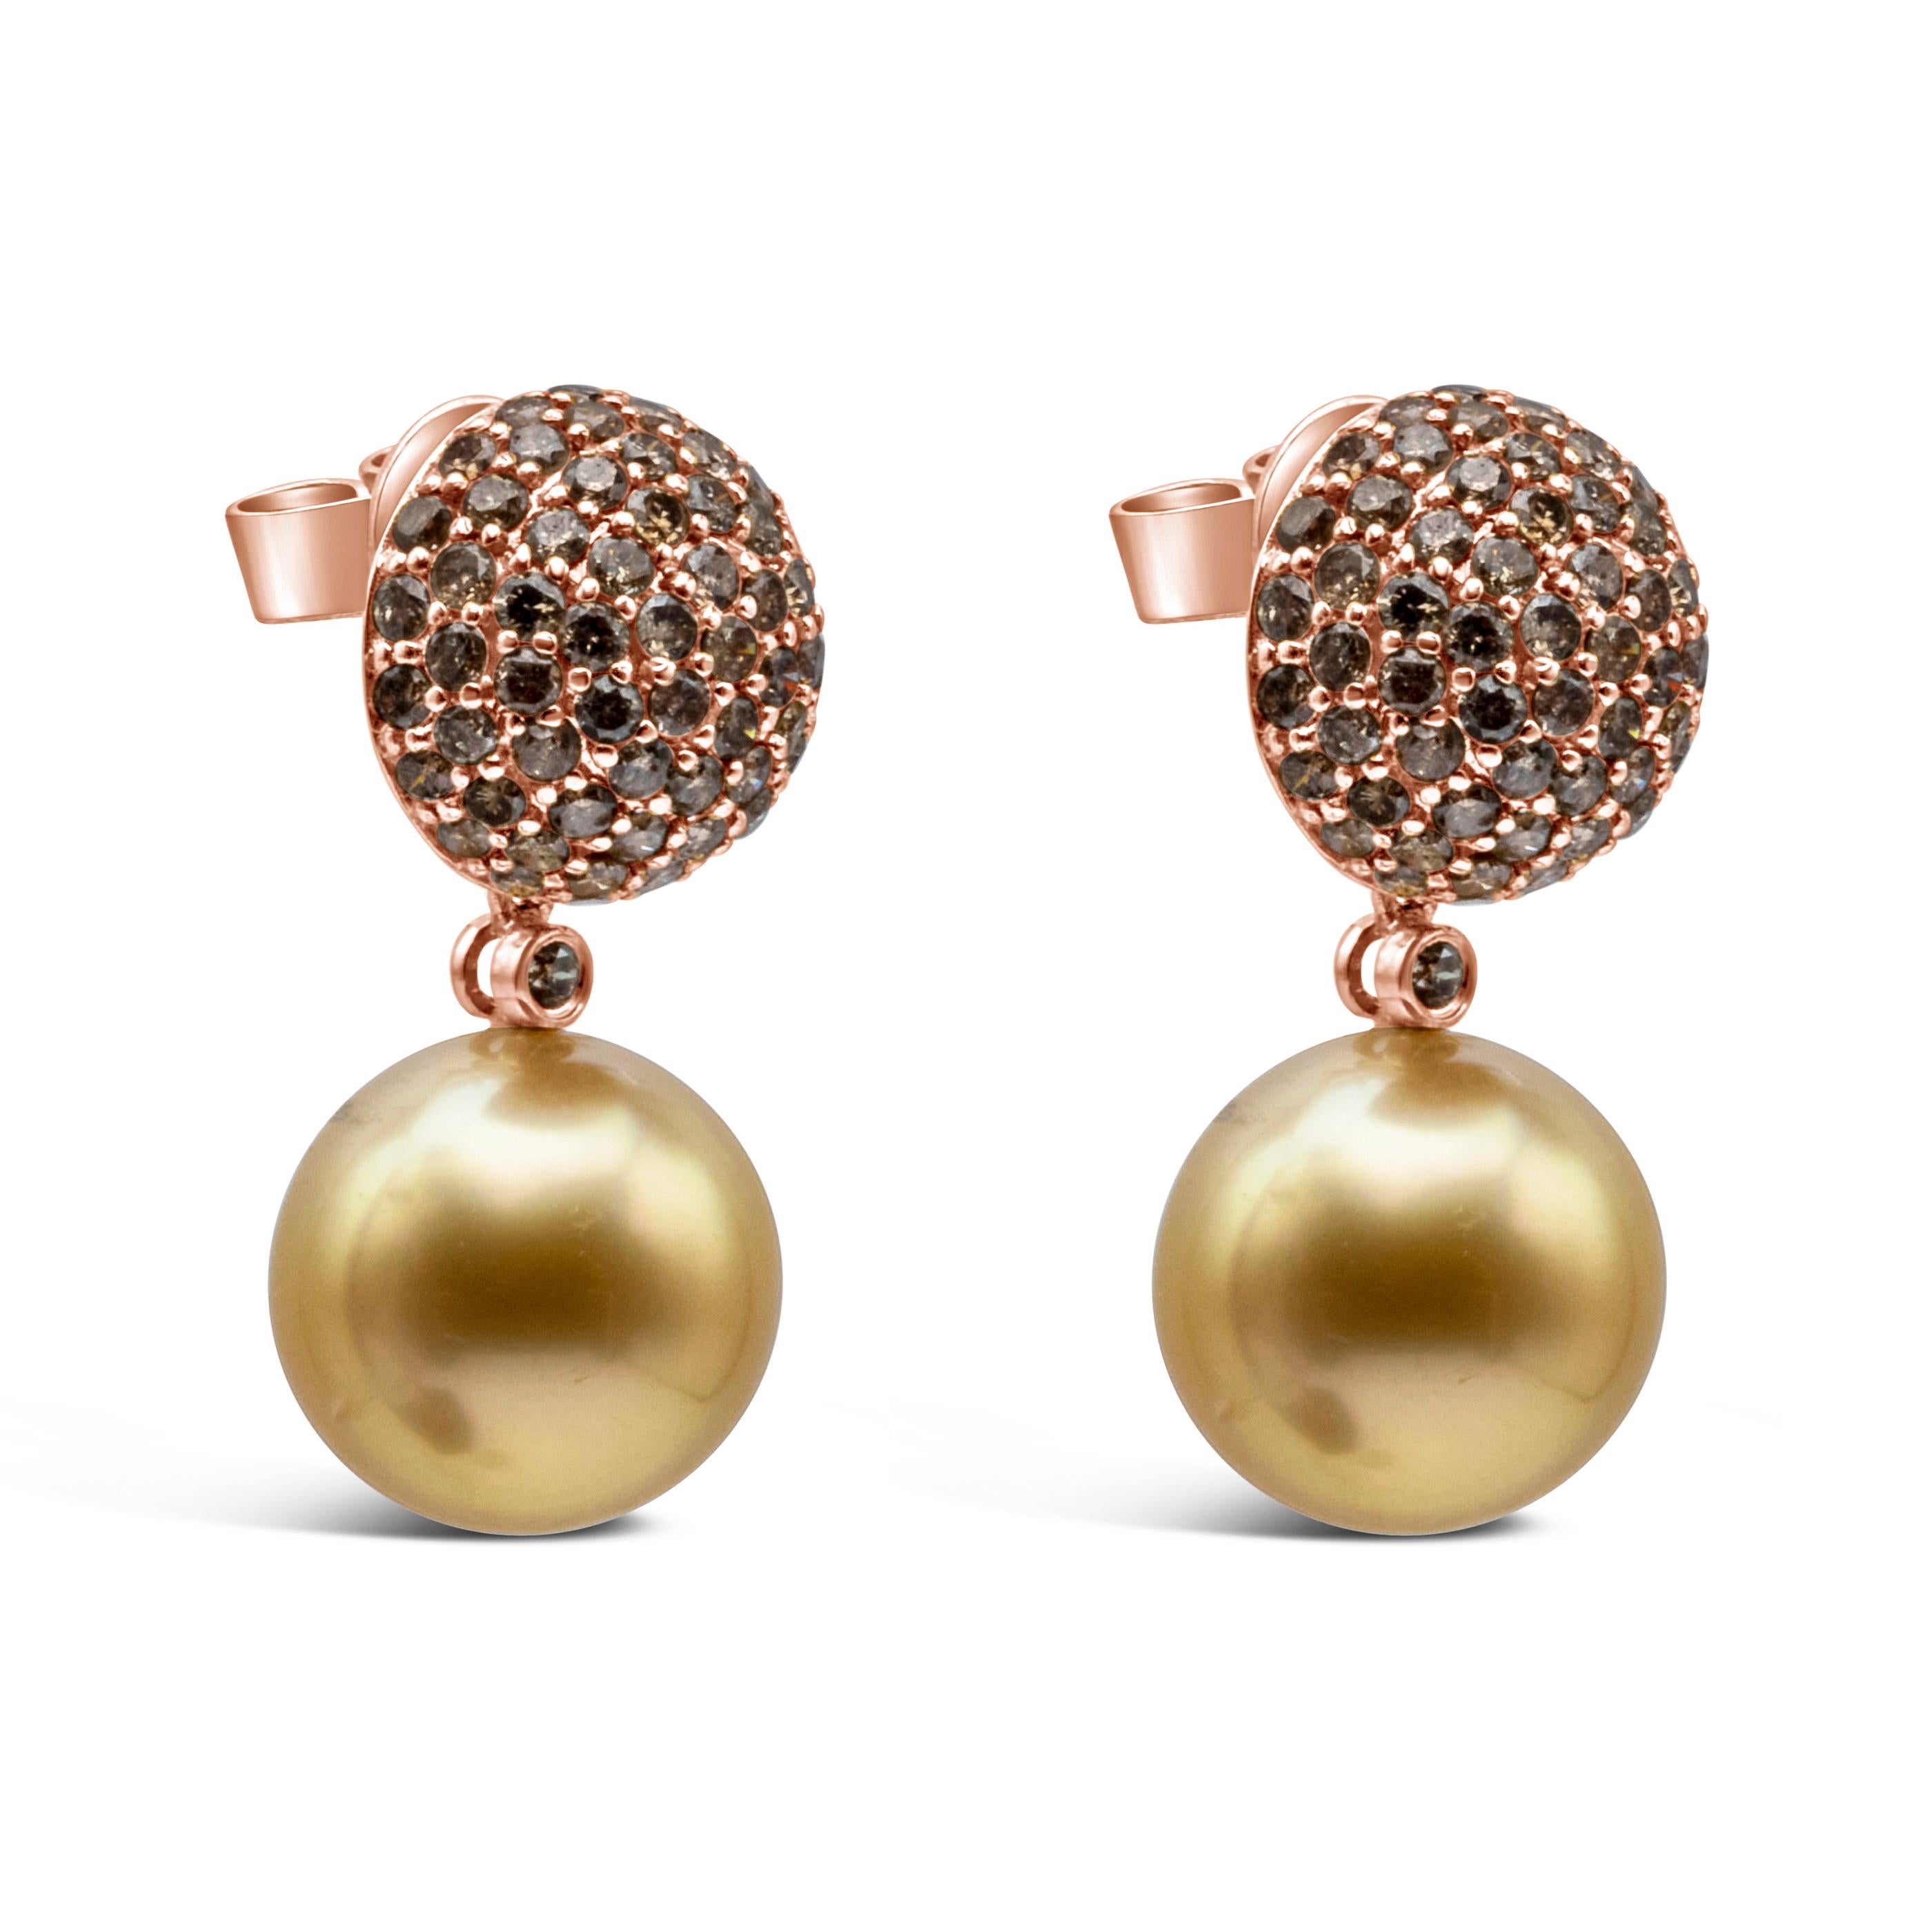 This classy and elegant stud earrings showcases 11-12 mm south sea golden pearls weighing 4.25 grams and the champagne diamond weighing 2.21 carats total, set in a micro-pave and suspended on a 18k rose gold diamond encrusted ball.

Style available